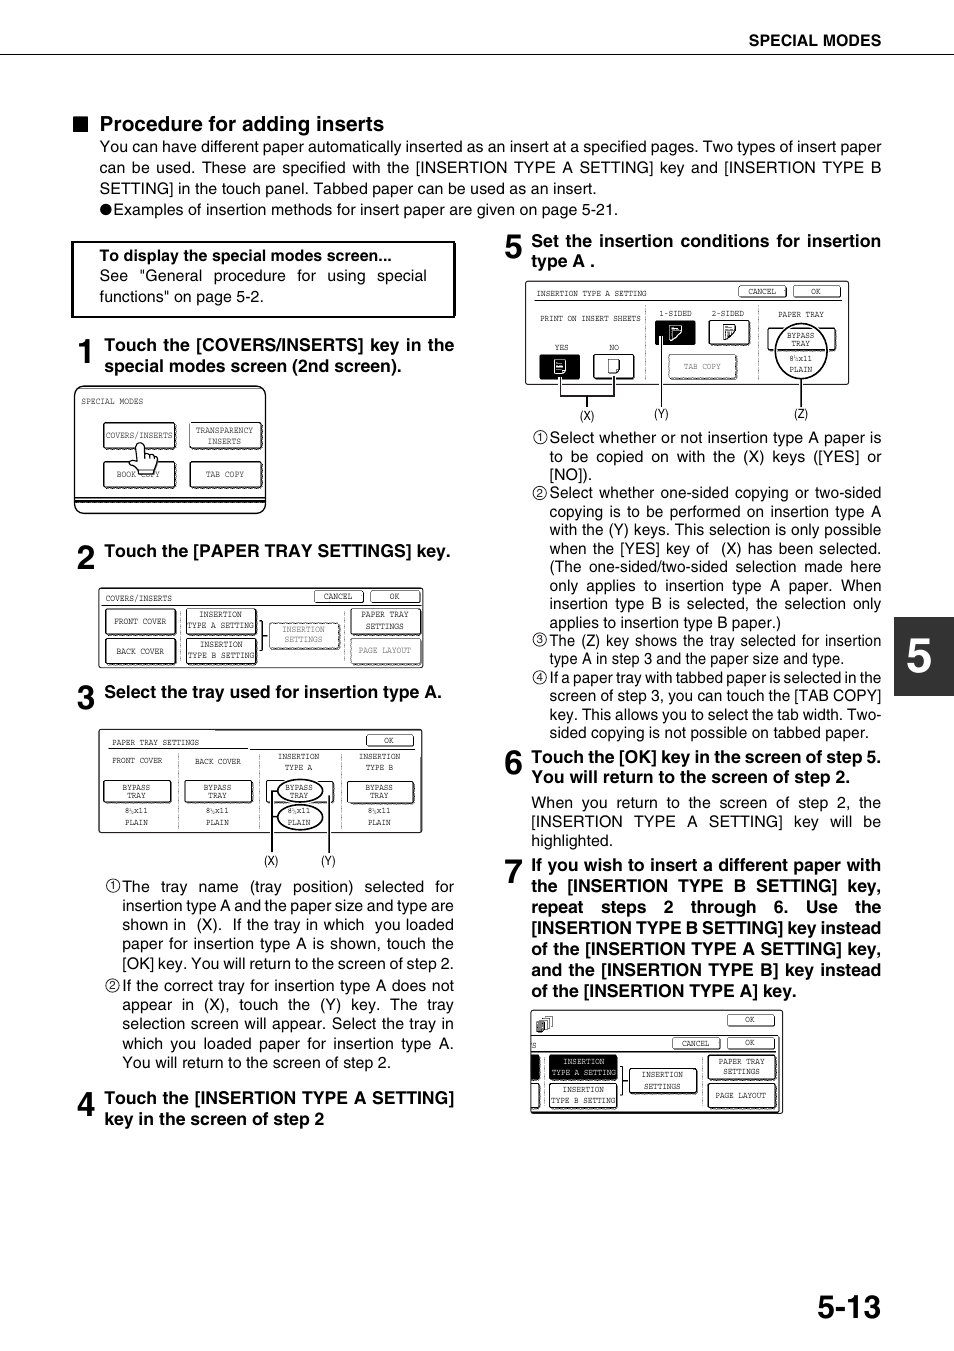 Procedure for adding inserts, Ge 5- 13, Touch the [paper tray settings] key | Select the tray used for insertion type a, Set the insertion conditions for insertion type a, Special modes | Sharp AR-M700N User Manual | Page 109 / 172